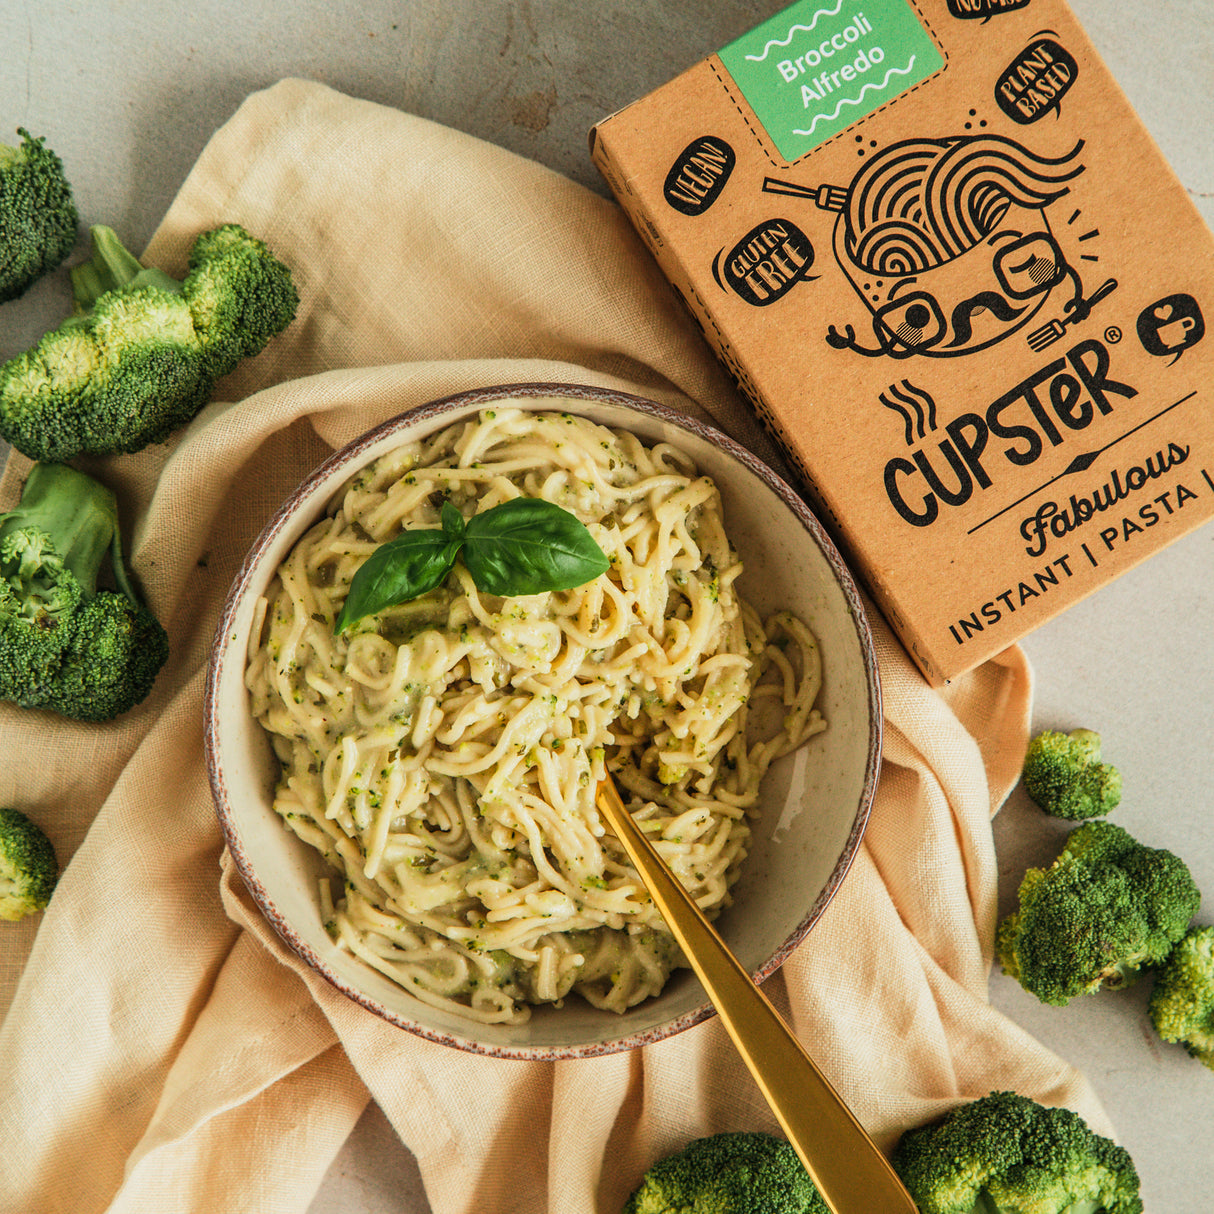 Cupster Instant Not Alfredo Broccoli Pasta 94g